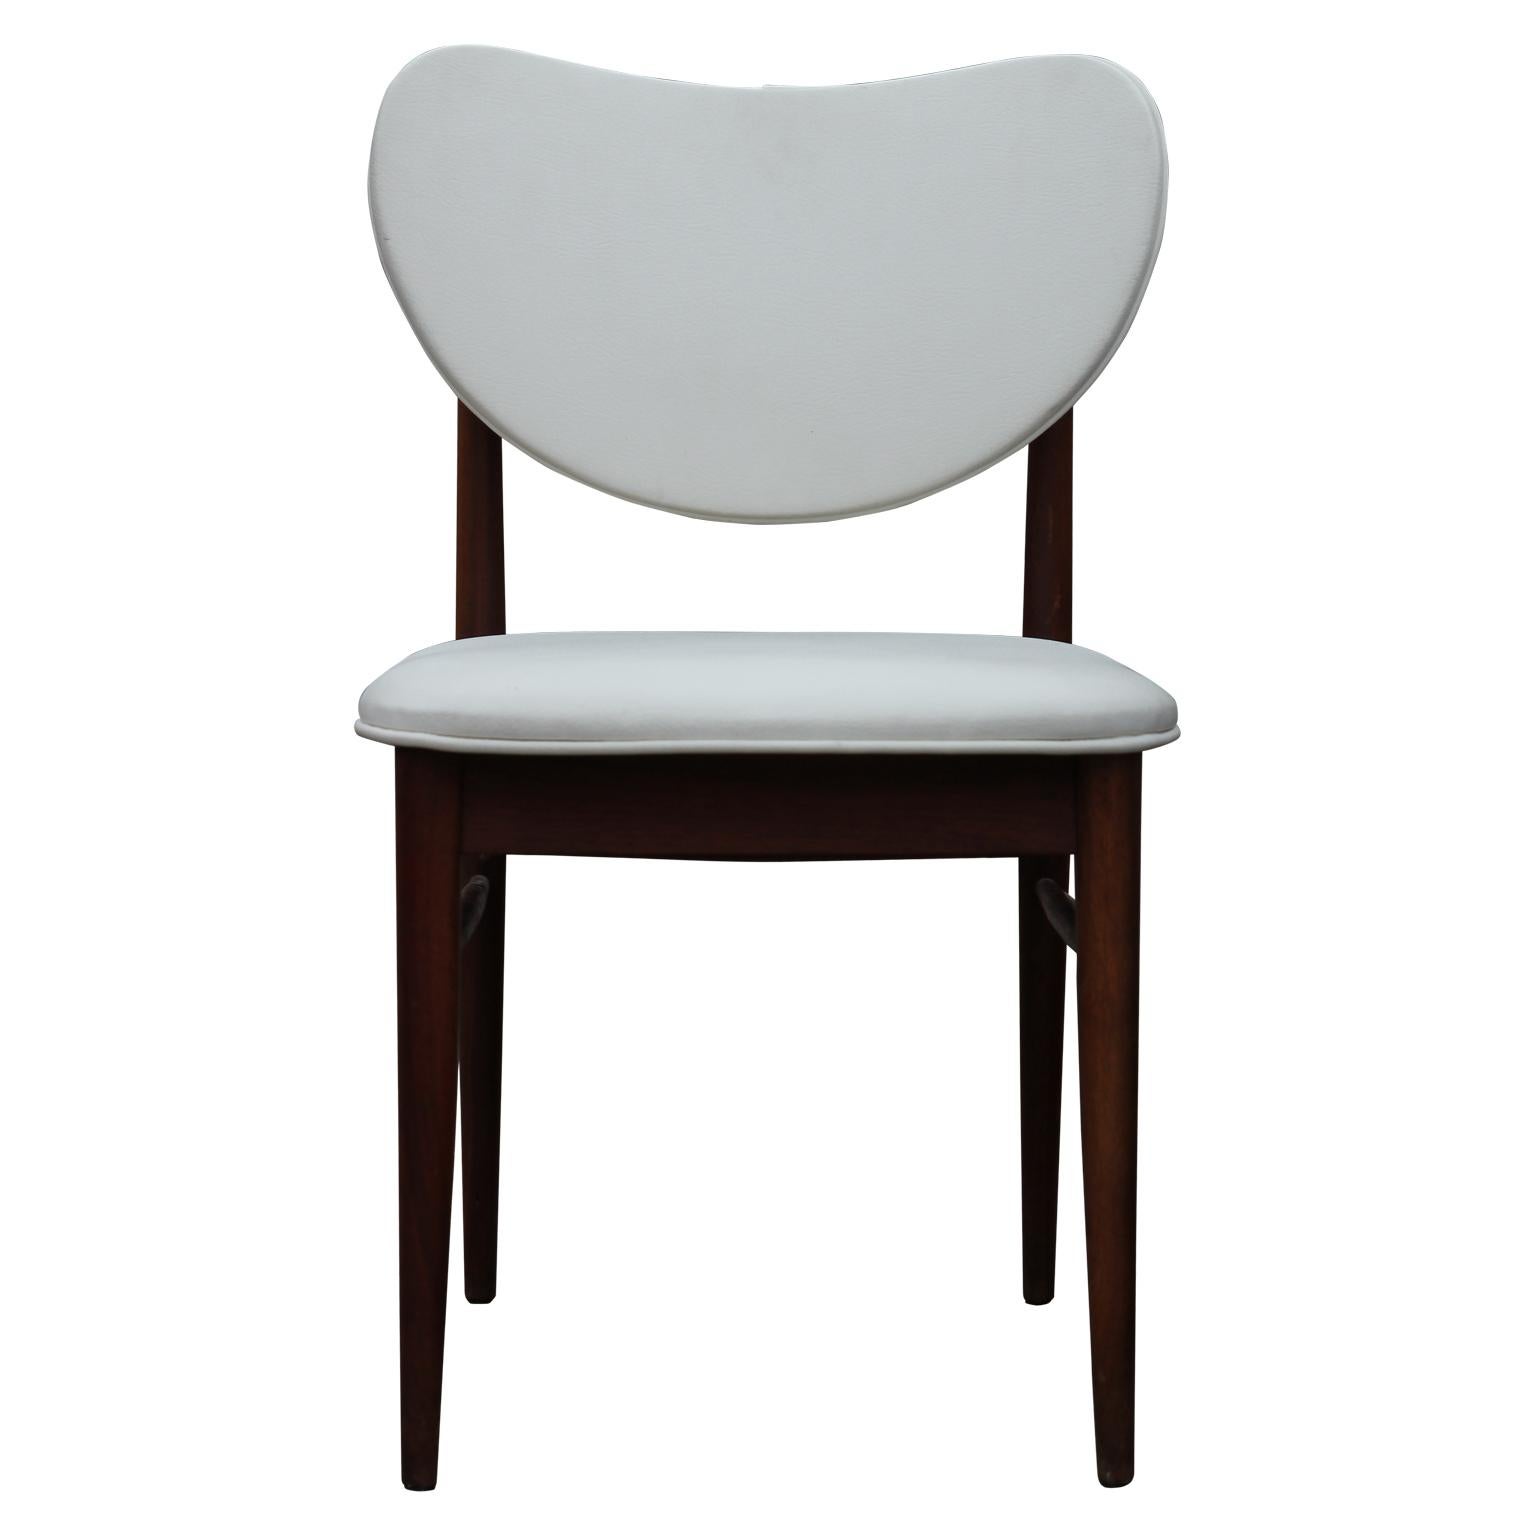 Sleek set of four white leather dining chairs with a teak base. The chairs are in the style of Finn Juhl's furniture designs, 1950s.